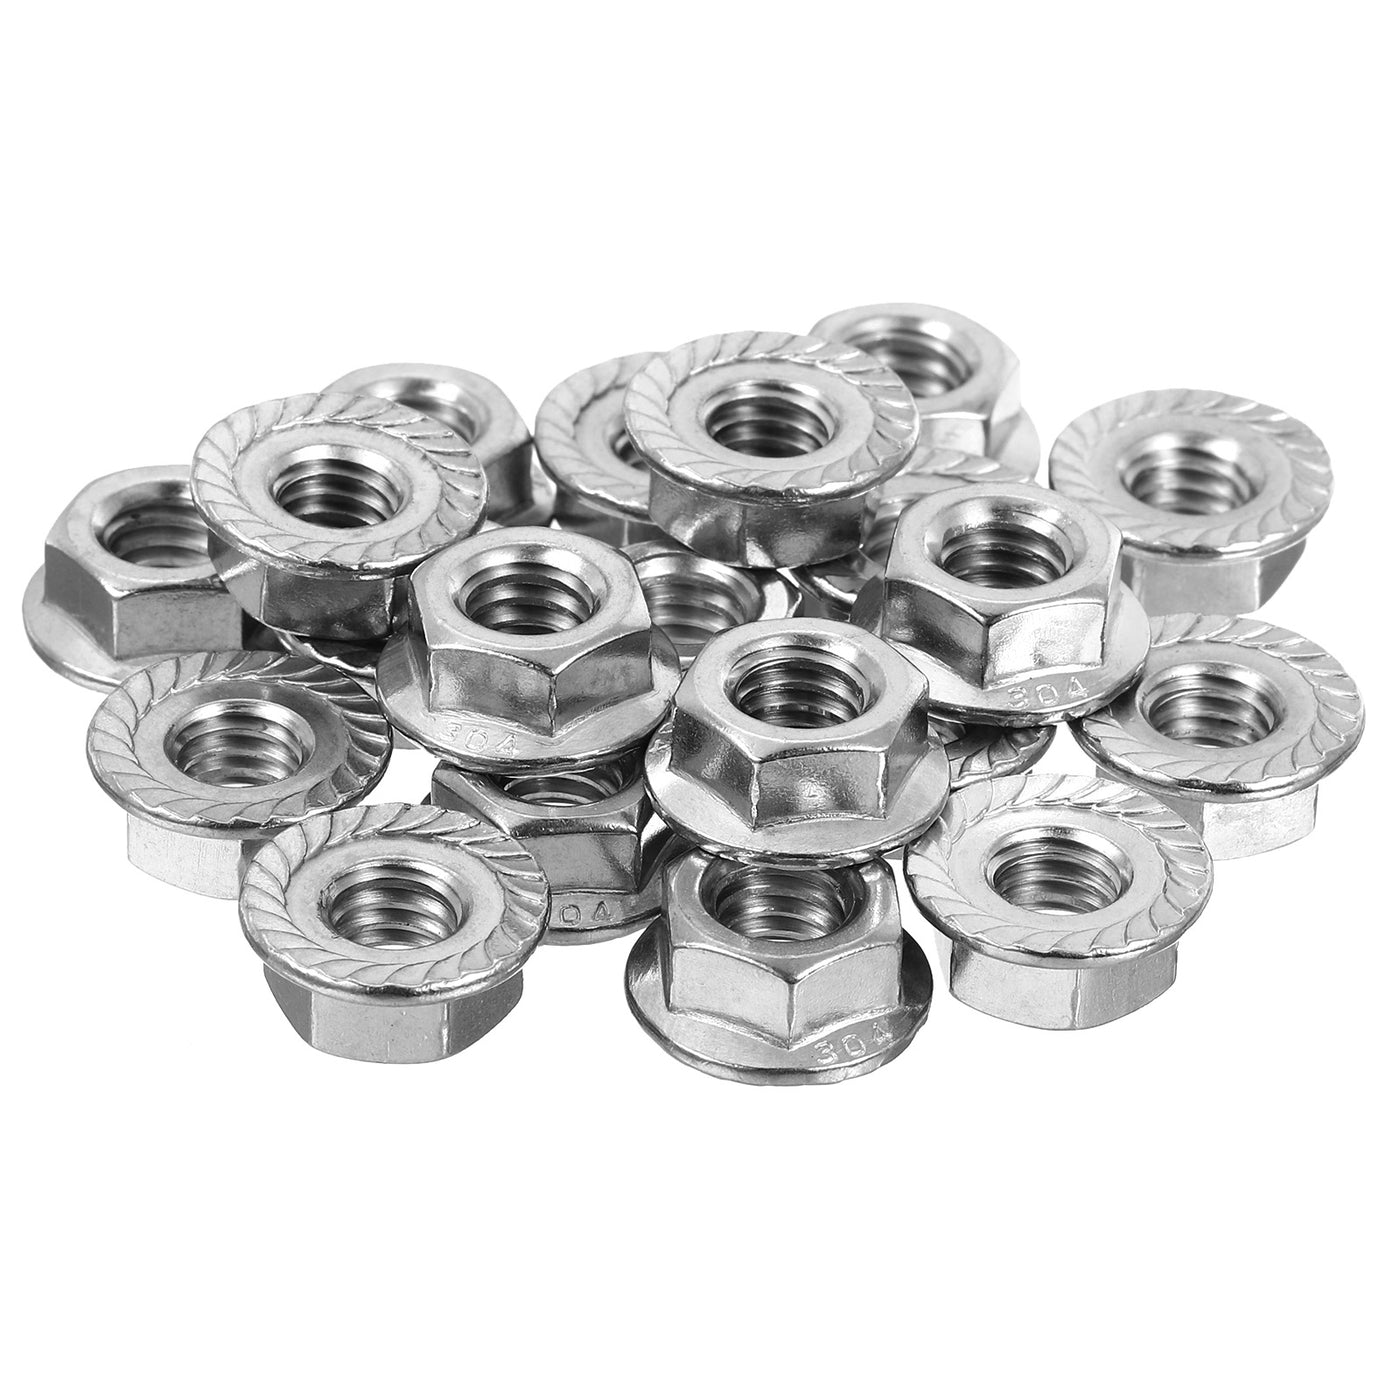 uxcell Uxcell 5/16-18 Serrated Flange Hex Lock Nuts, 20Pcs Hexagon Flange Nut, Silver